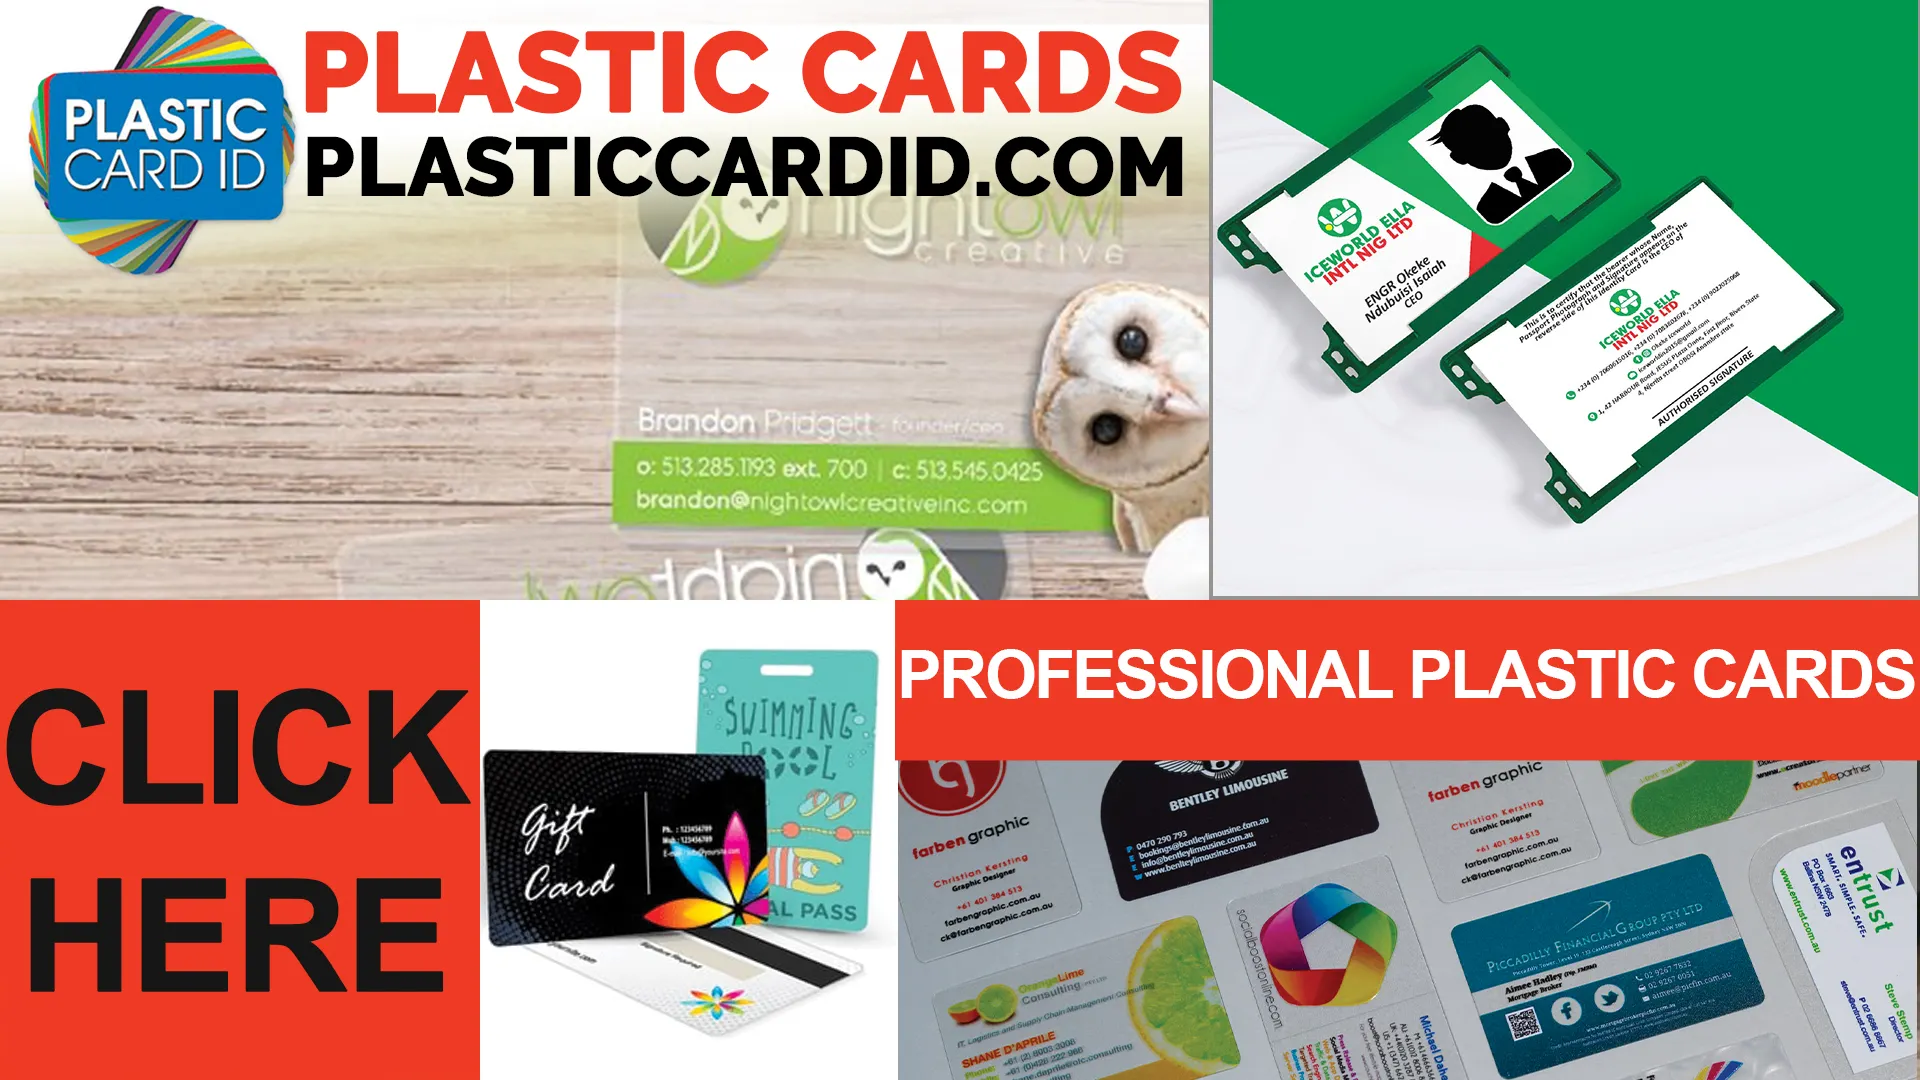 Plastic Card ID
: Elevating Your Brand with Innovative Card Printing Solutions